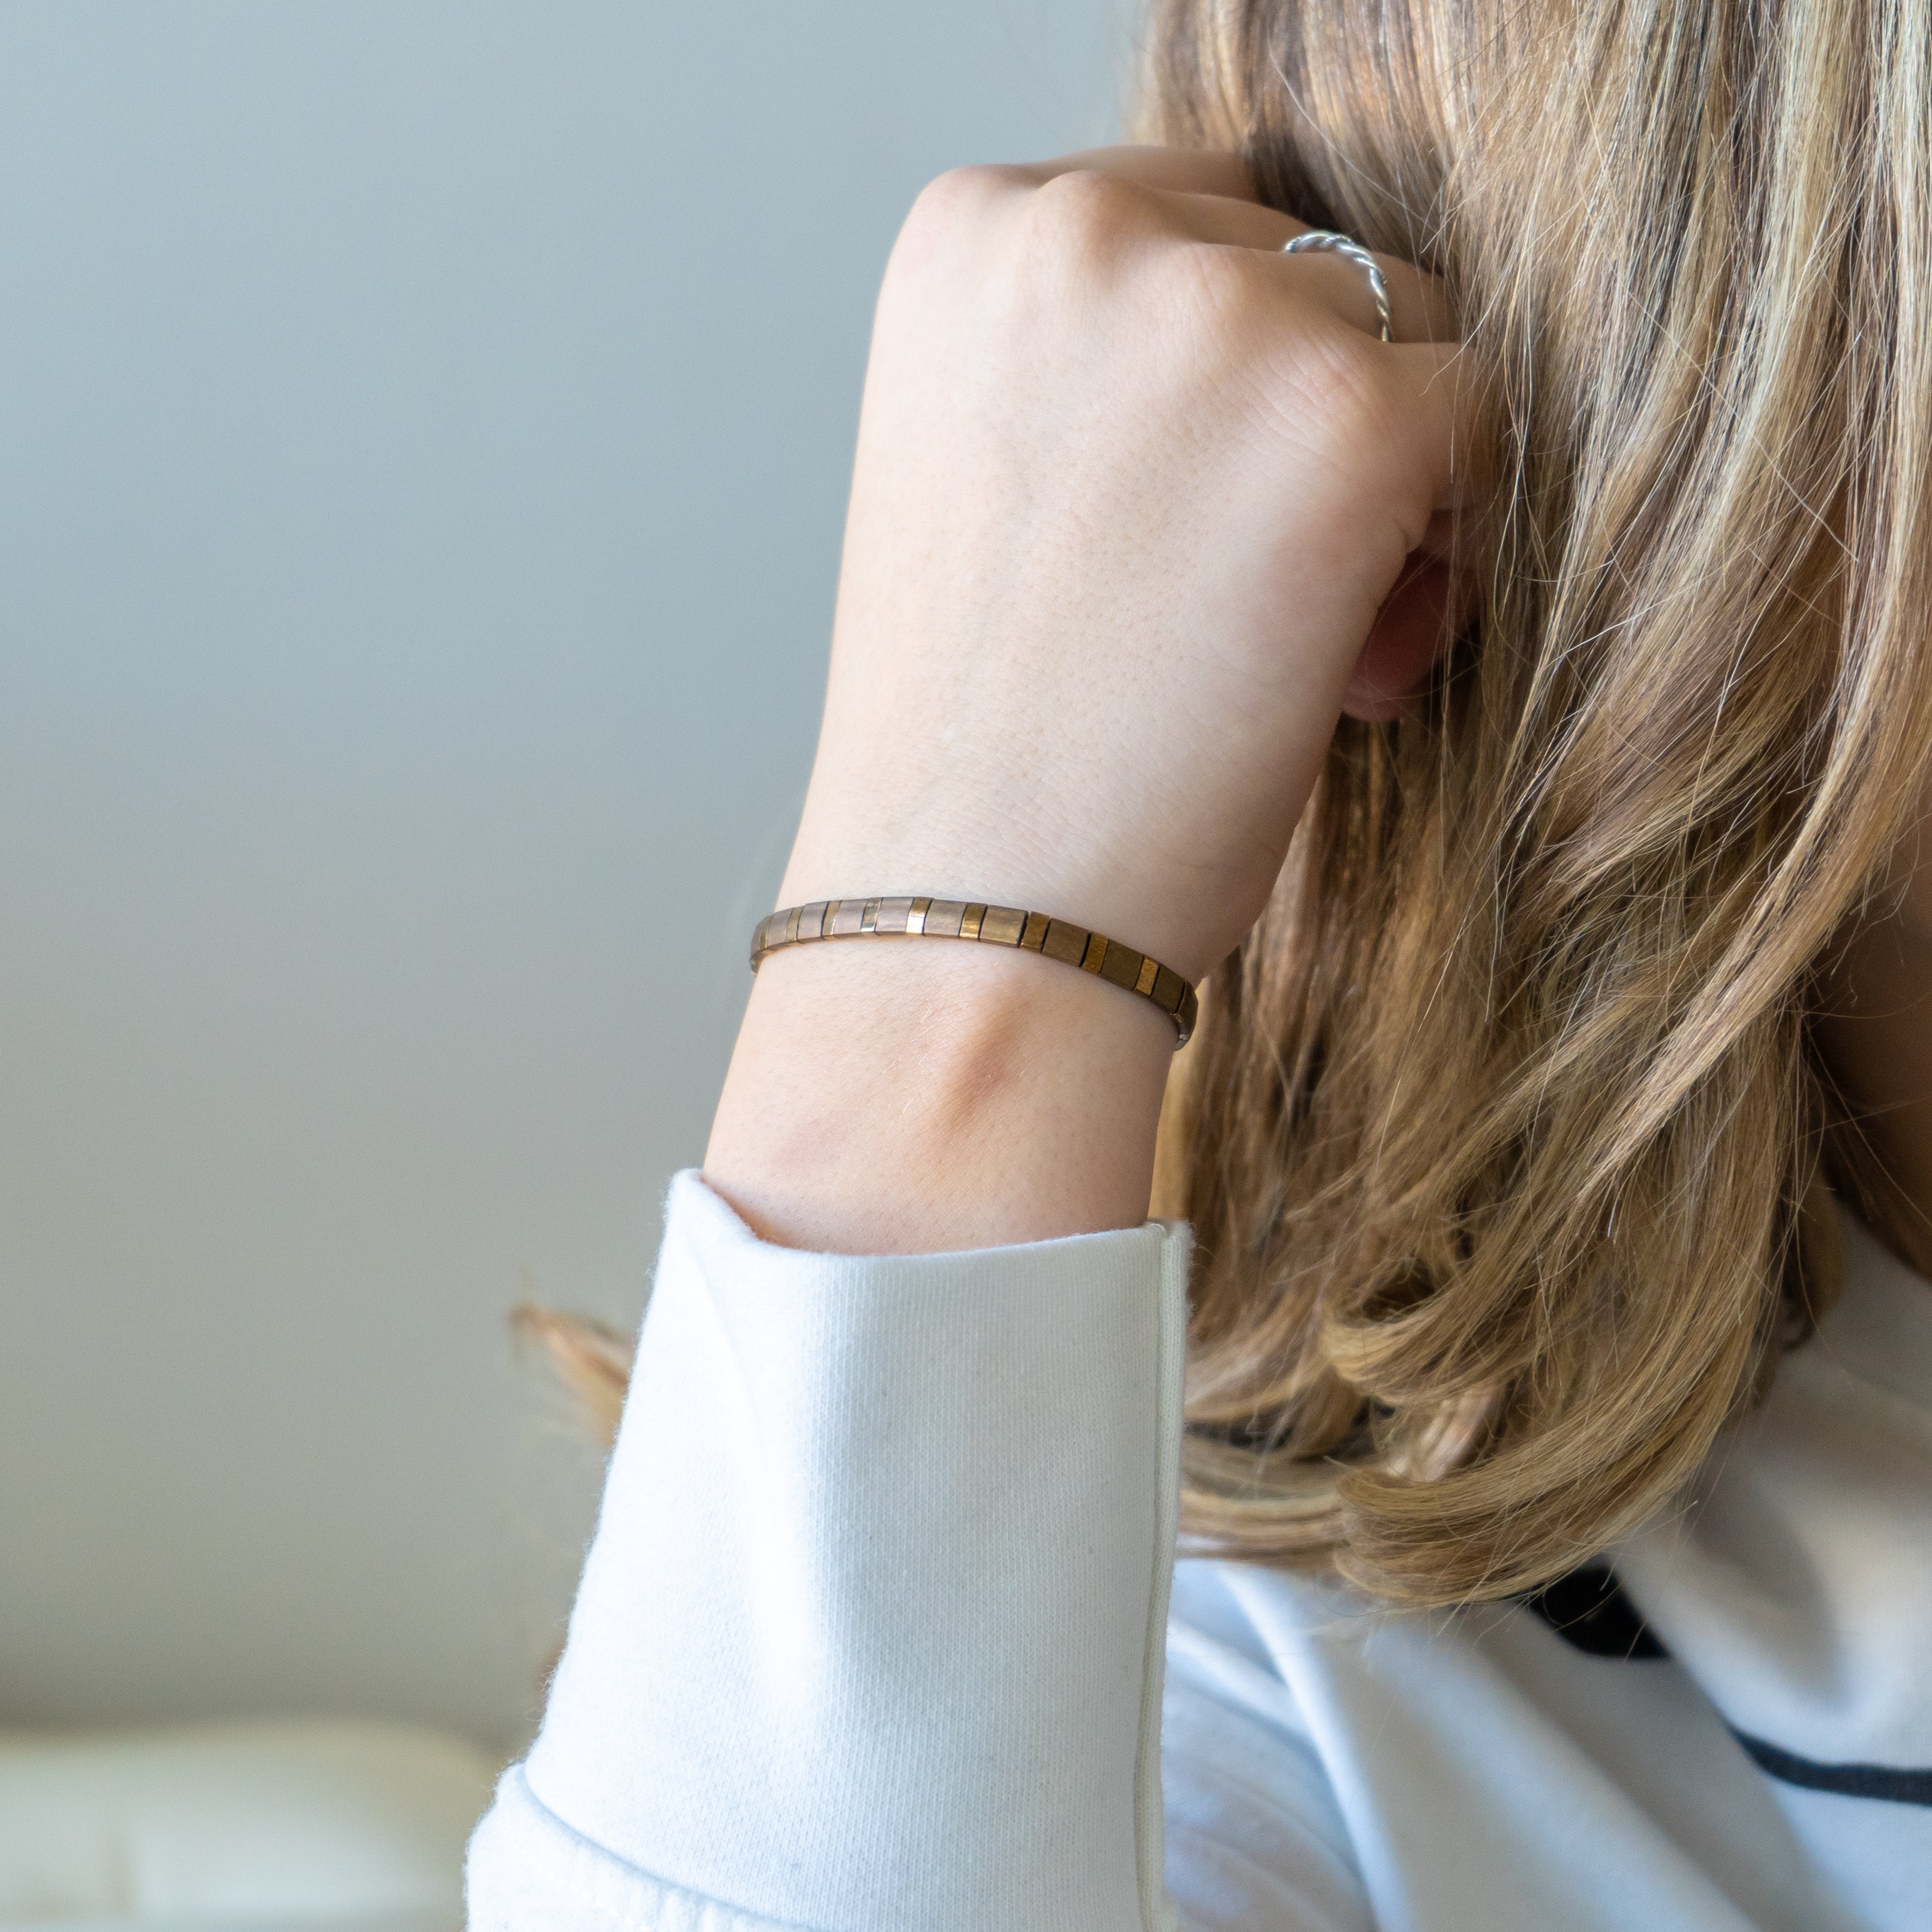 a woman wearing a white shirt and a gold bracelet